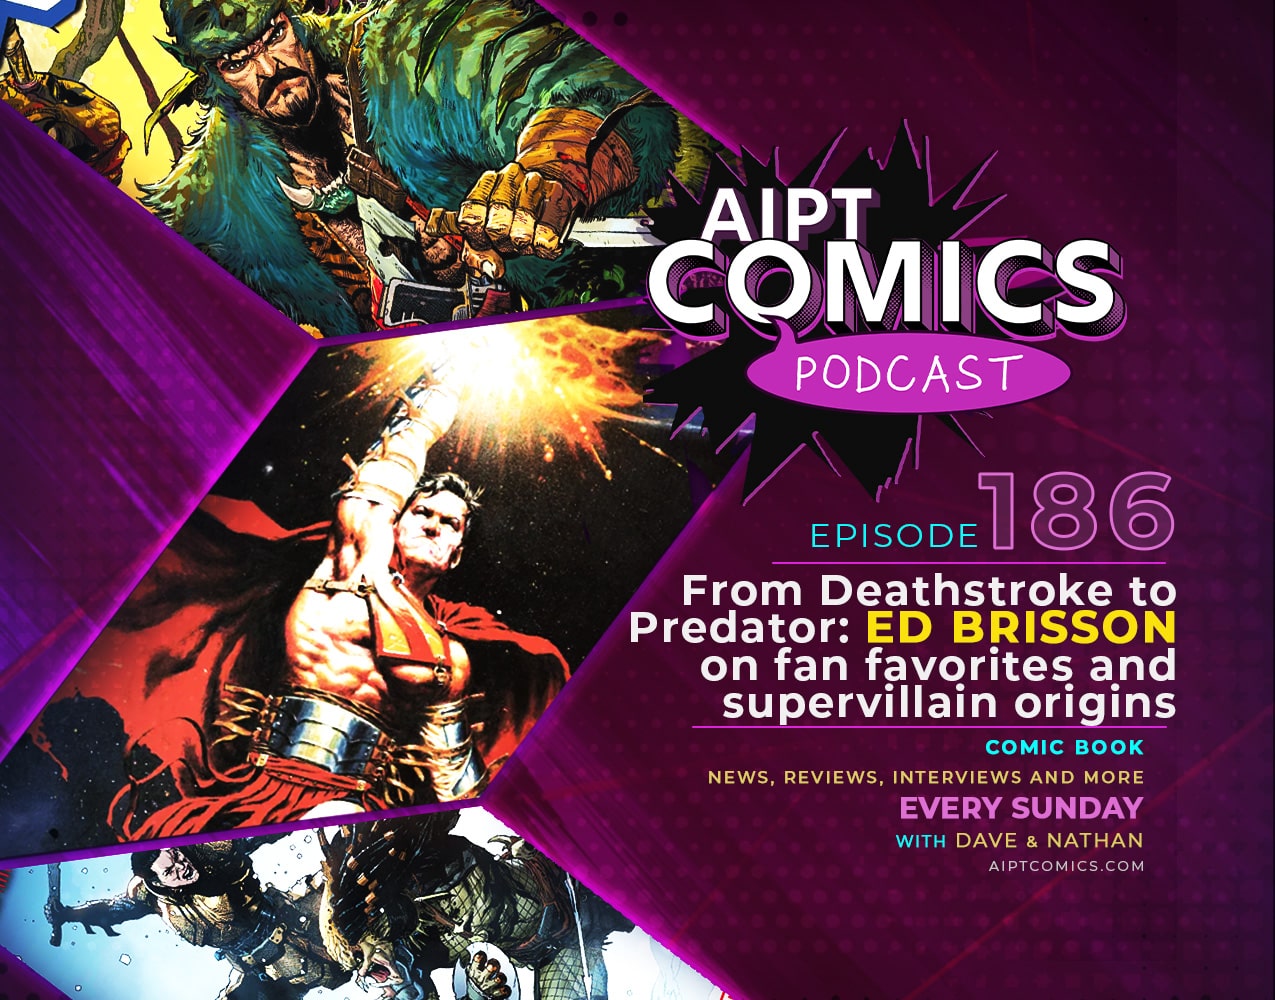 AIPT Comics Podcast Episode 186: From Deathstroke to Predator: Ed Brisson on fan favorites and supervillain origins